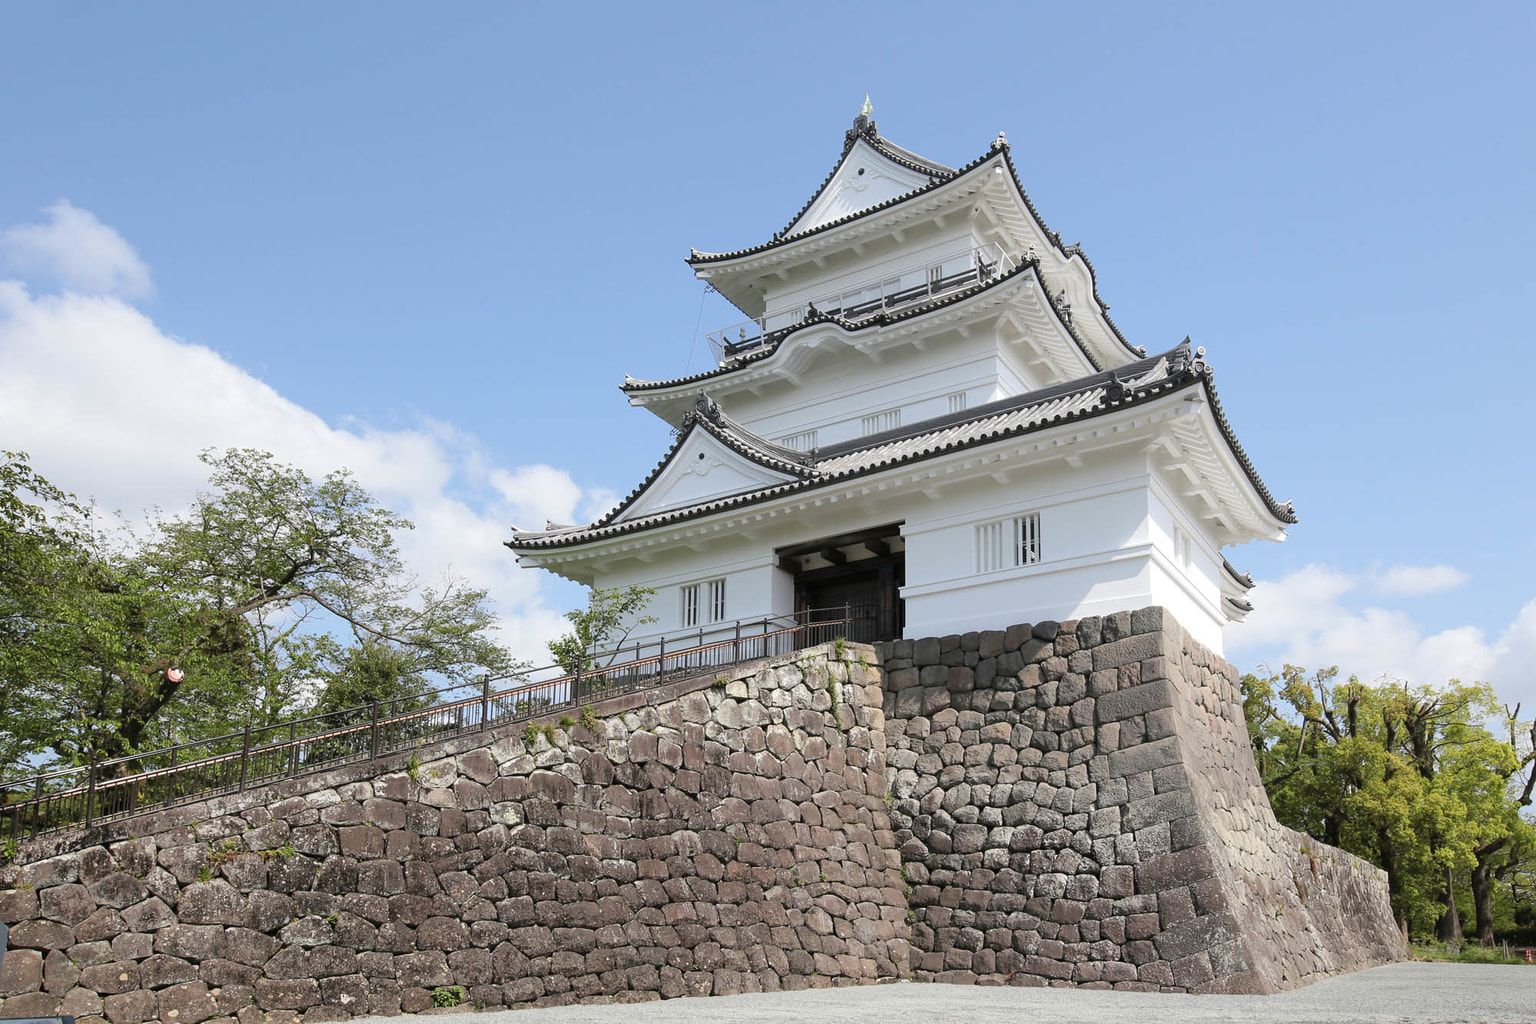 Odawara Castle is considered one of Japan's finest castles.